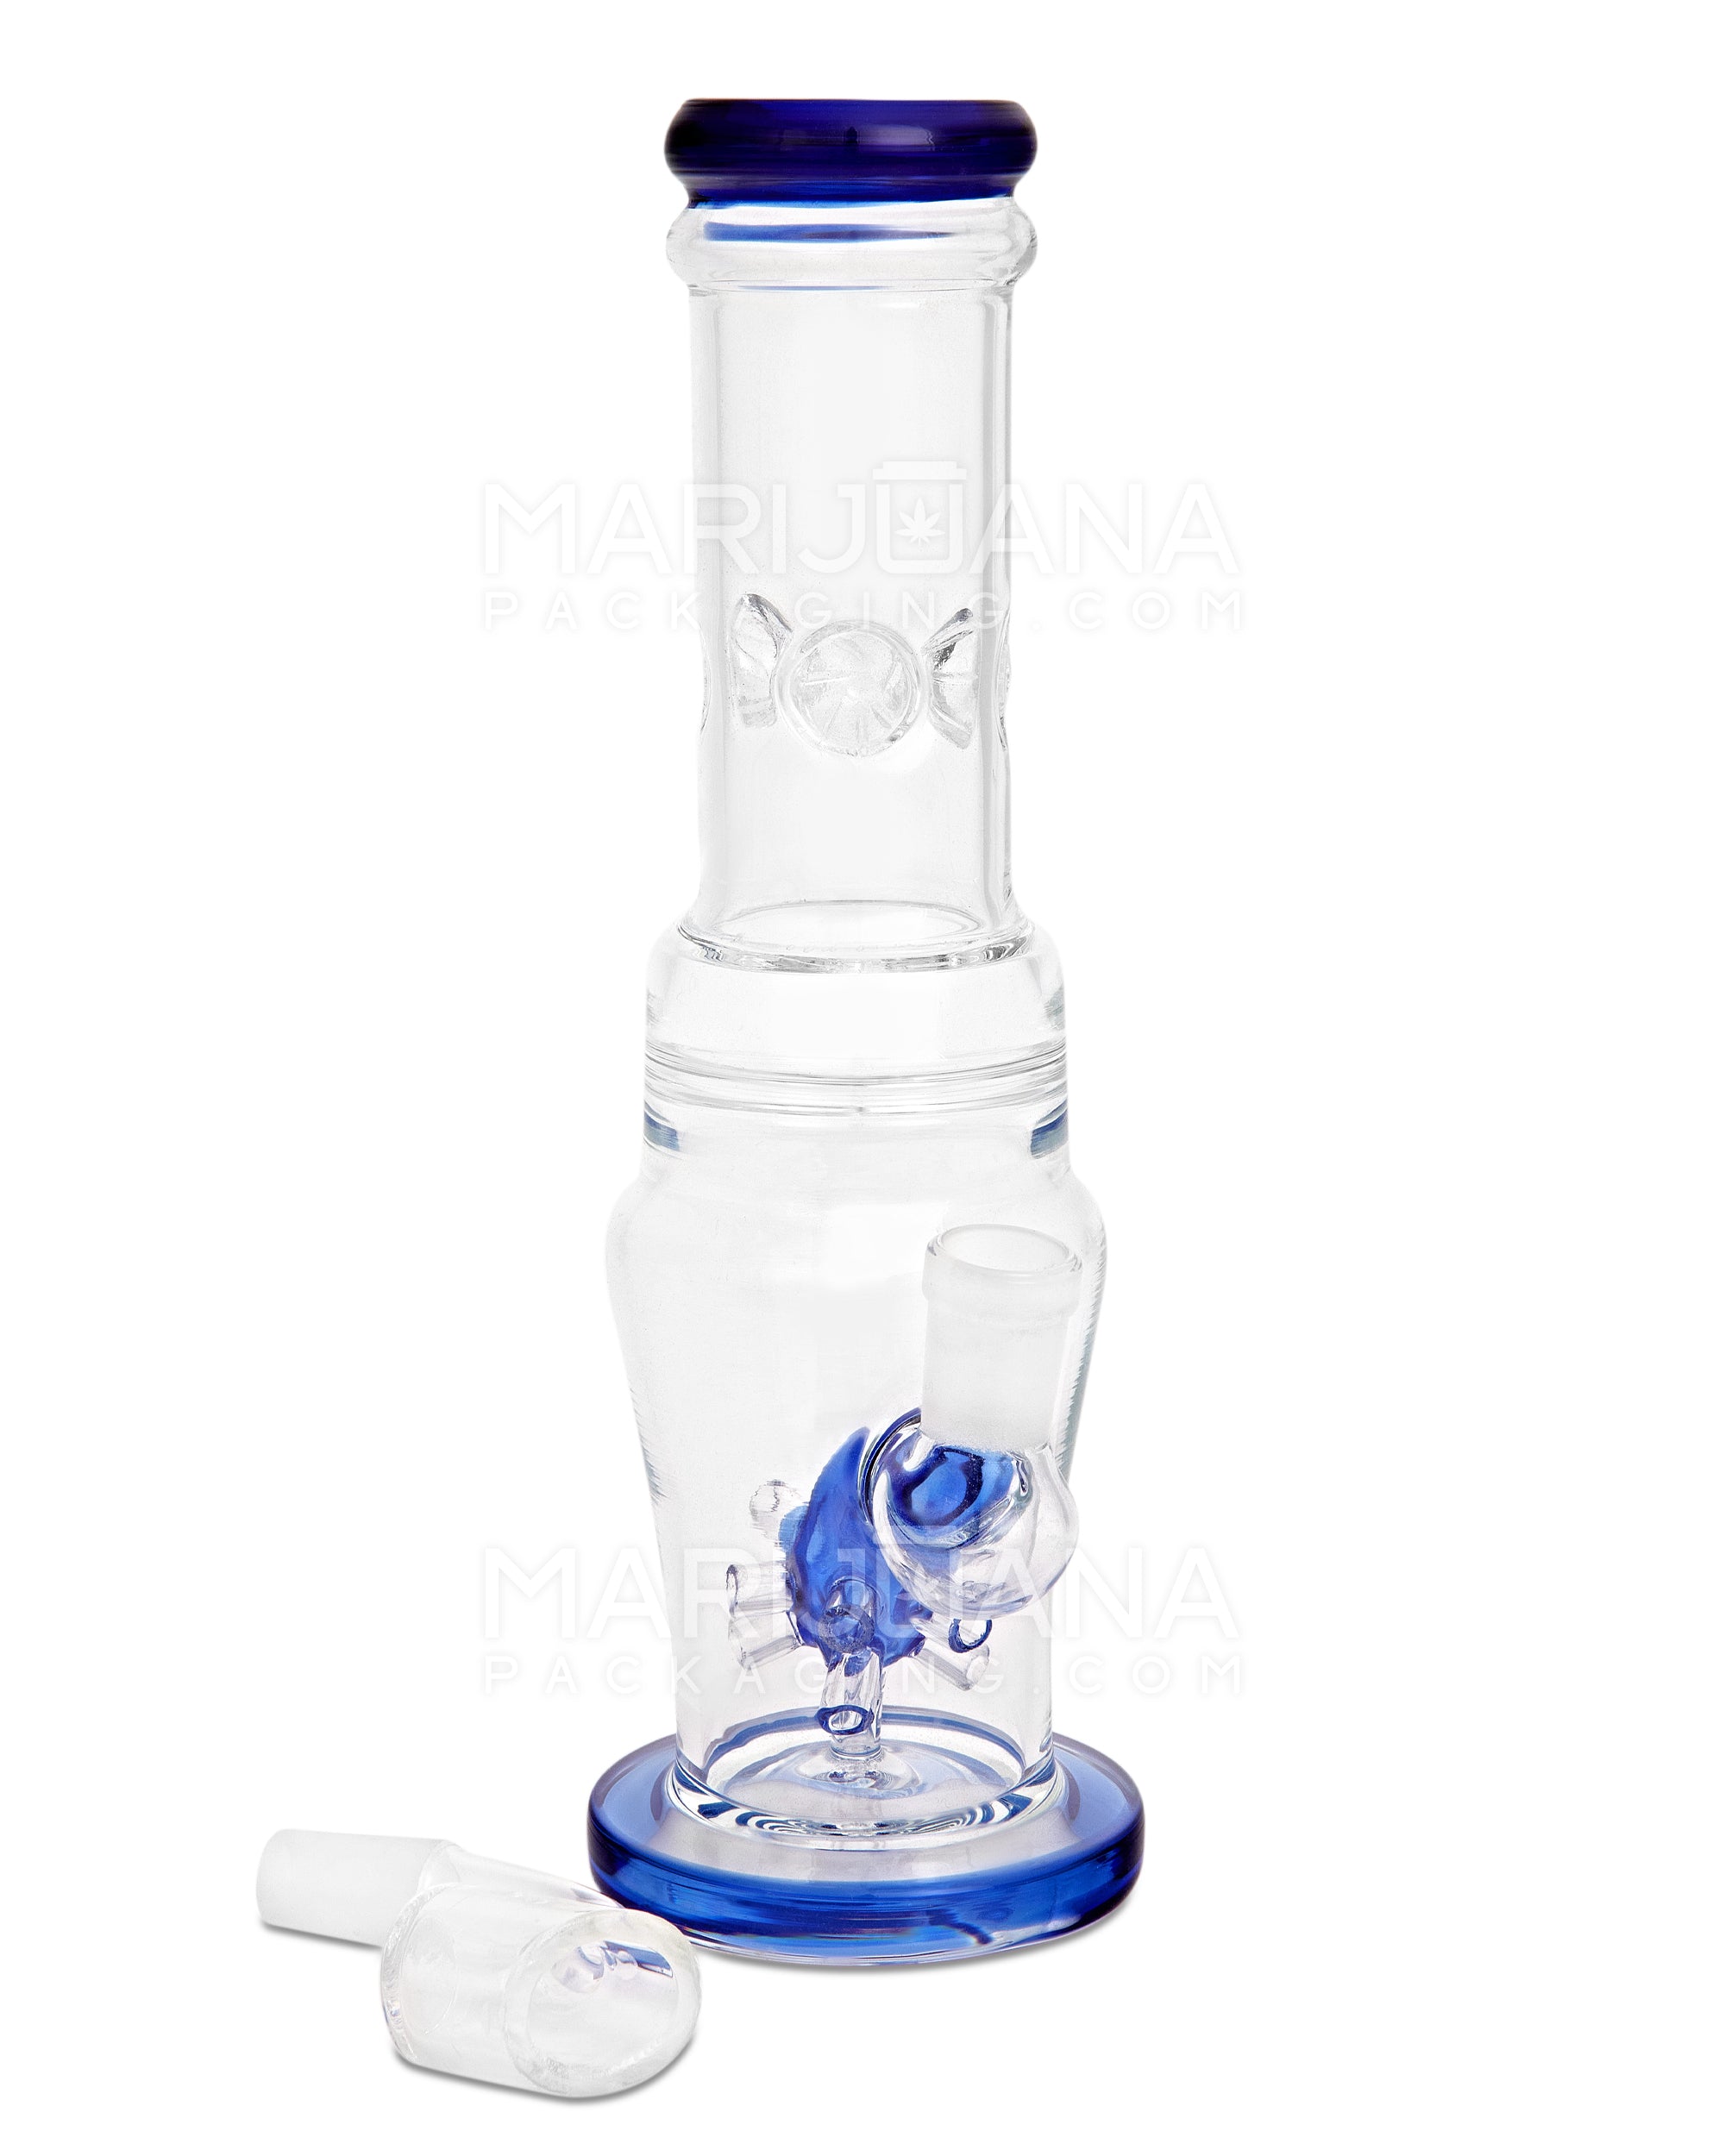 Straight Neck Atomic Perc Dab Rig w/ Ice Catcher & Thick Base | 10in Tall - 14mm Banger - Blue - 2